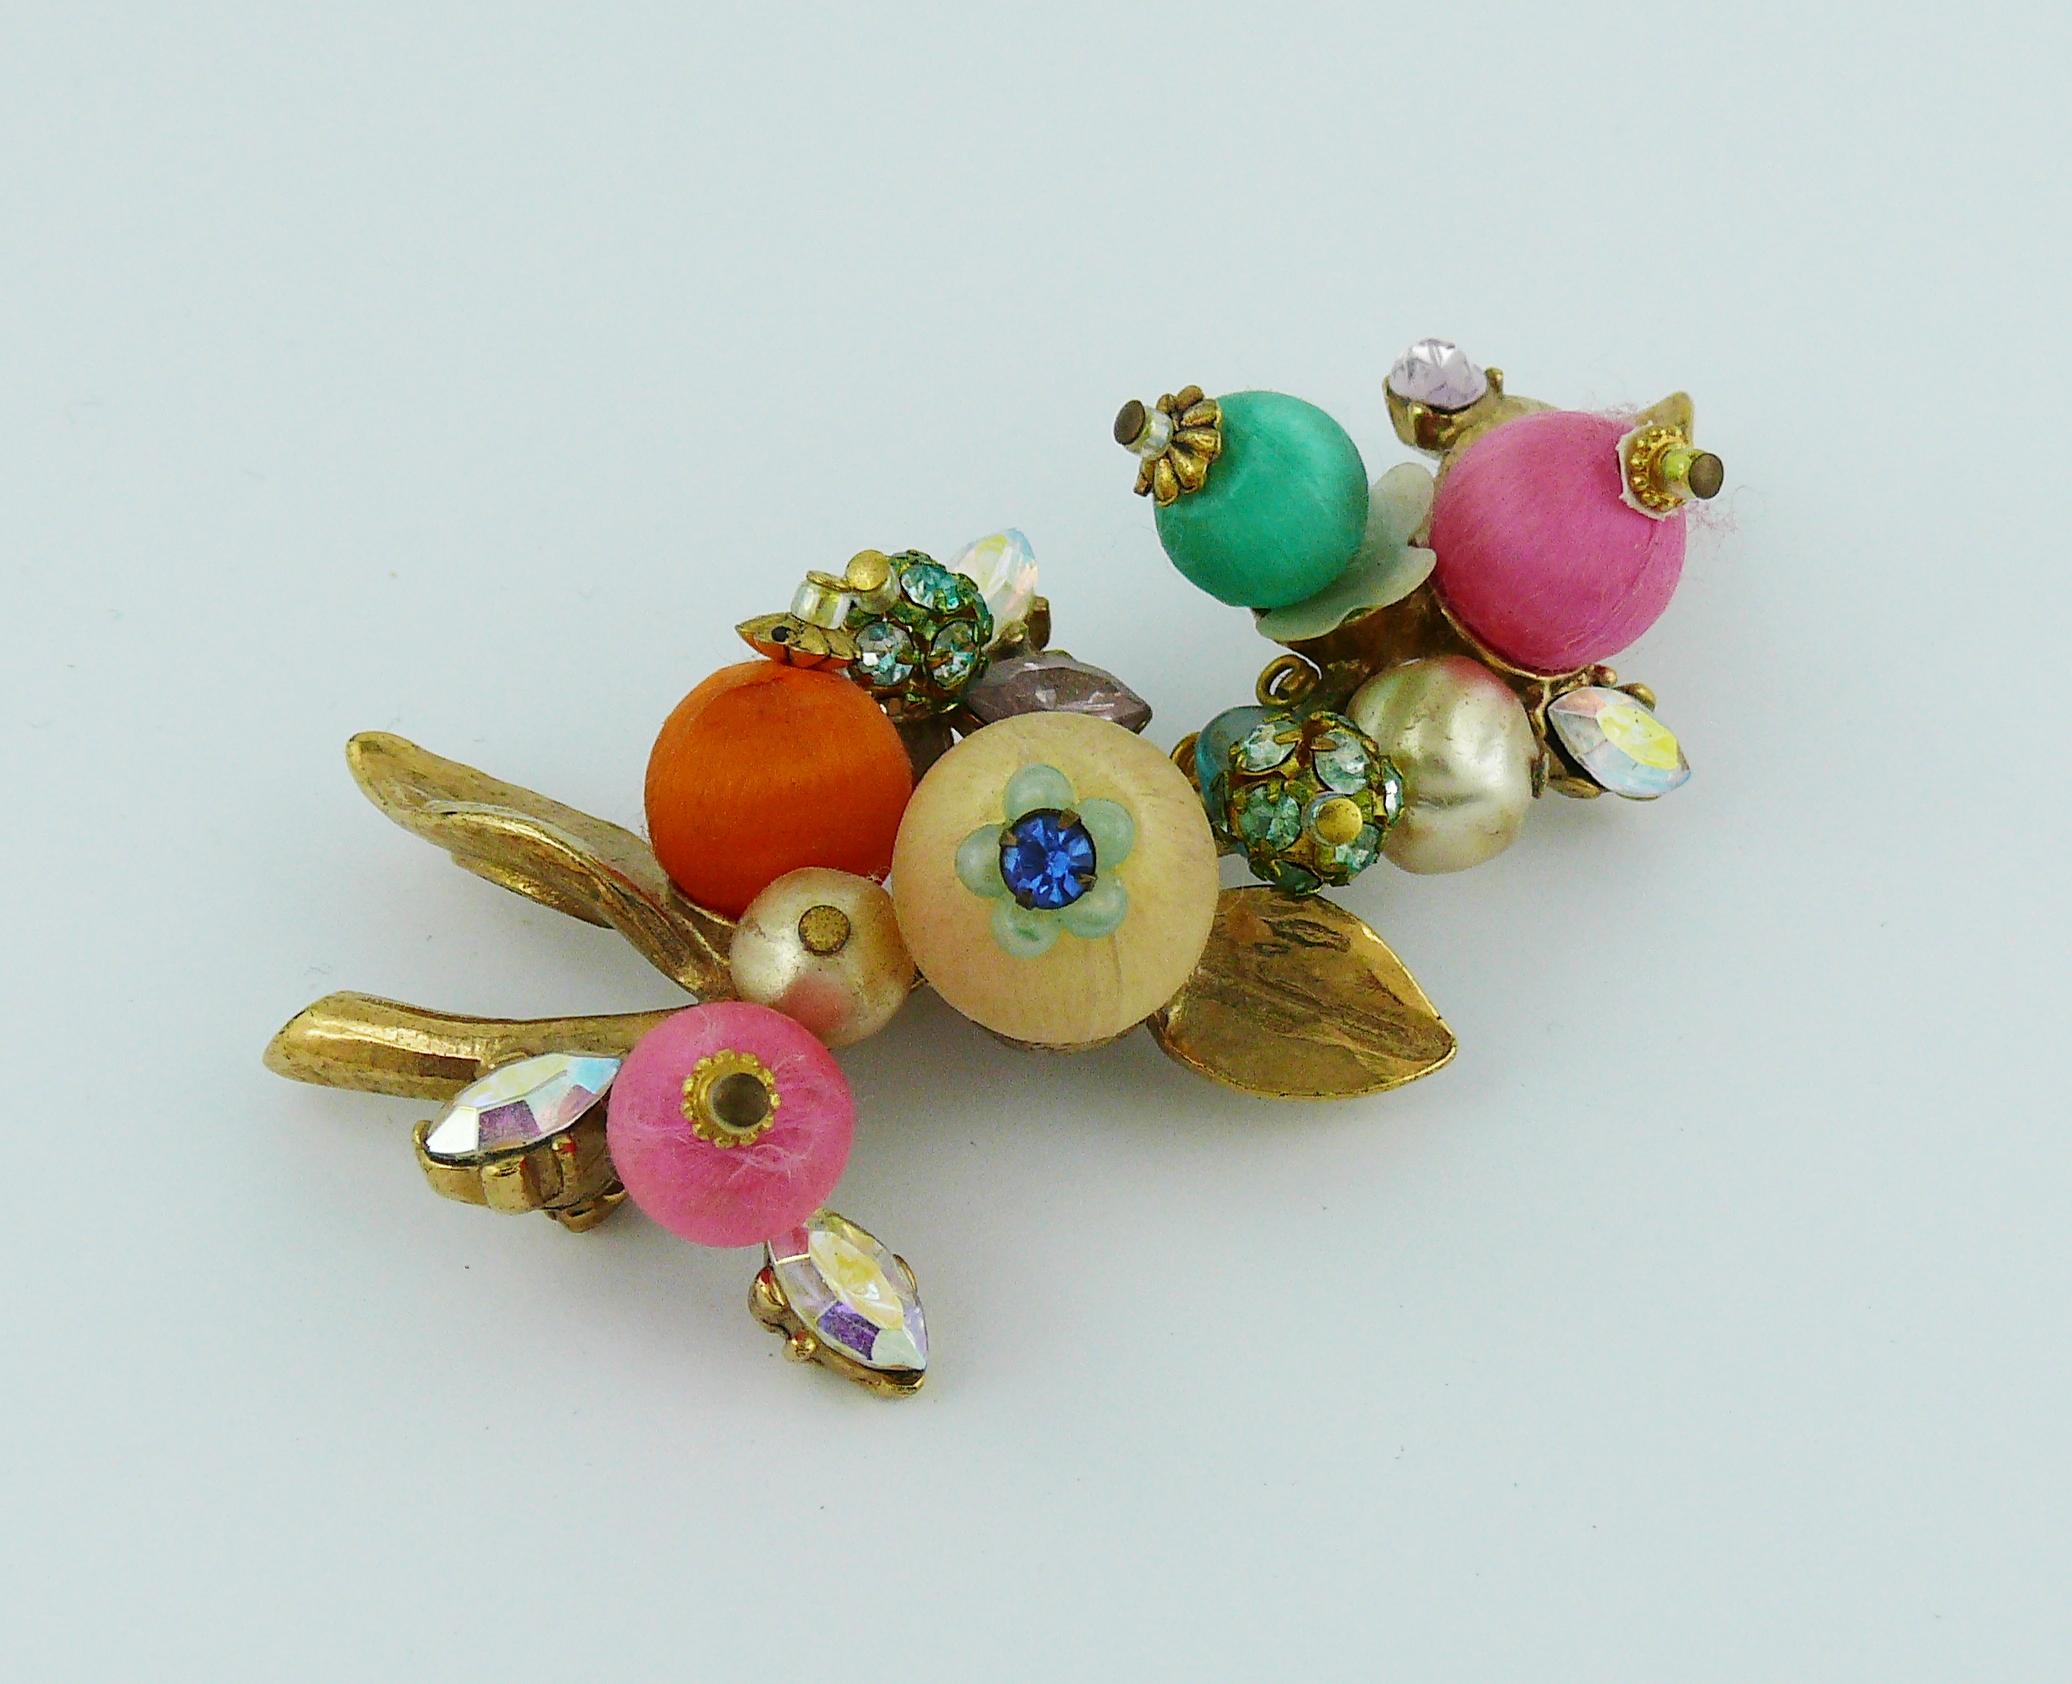 CHRISTIAN LACROIX vintage gold toned brooch featuring a floral spray made of multicolored textile balls, faux pearls and crystals.

Marked CHRISTIAN LACROIX CL Made in France.

Indicative measurements : length approx. 8 cm (3.15 inches) / max width